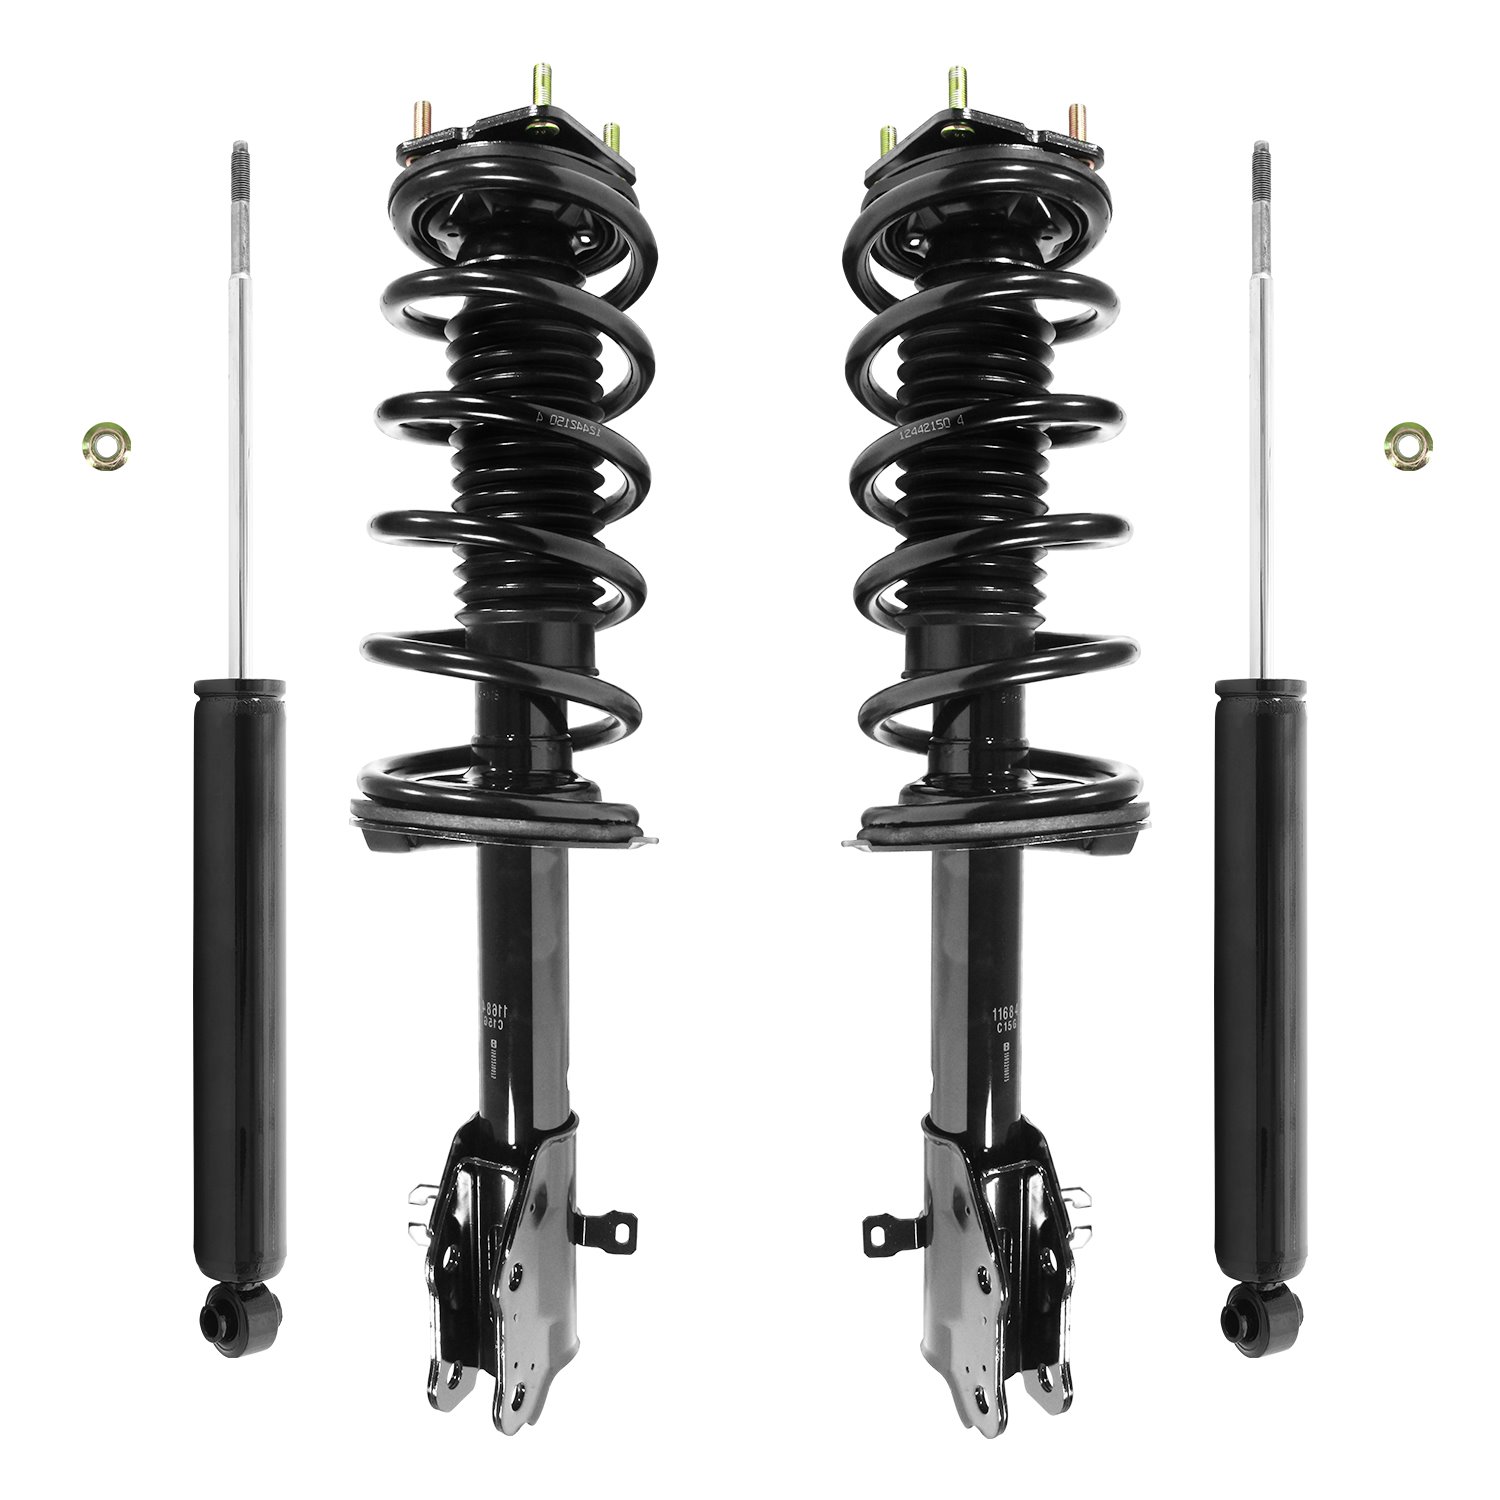 4-11683-259420-001 Front & Rear Suspension Strut & Coil Spring Assembly Fits Select Mazda CX-7